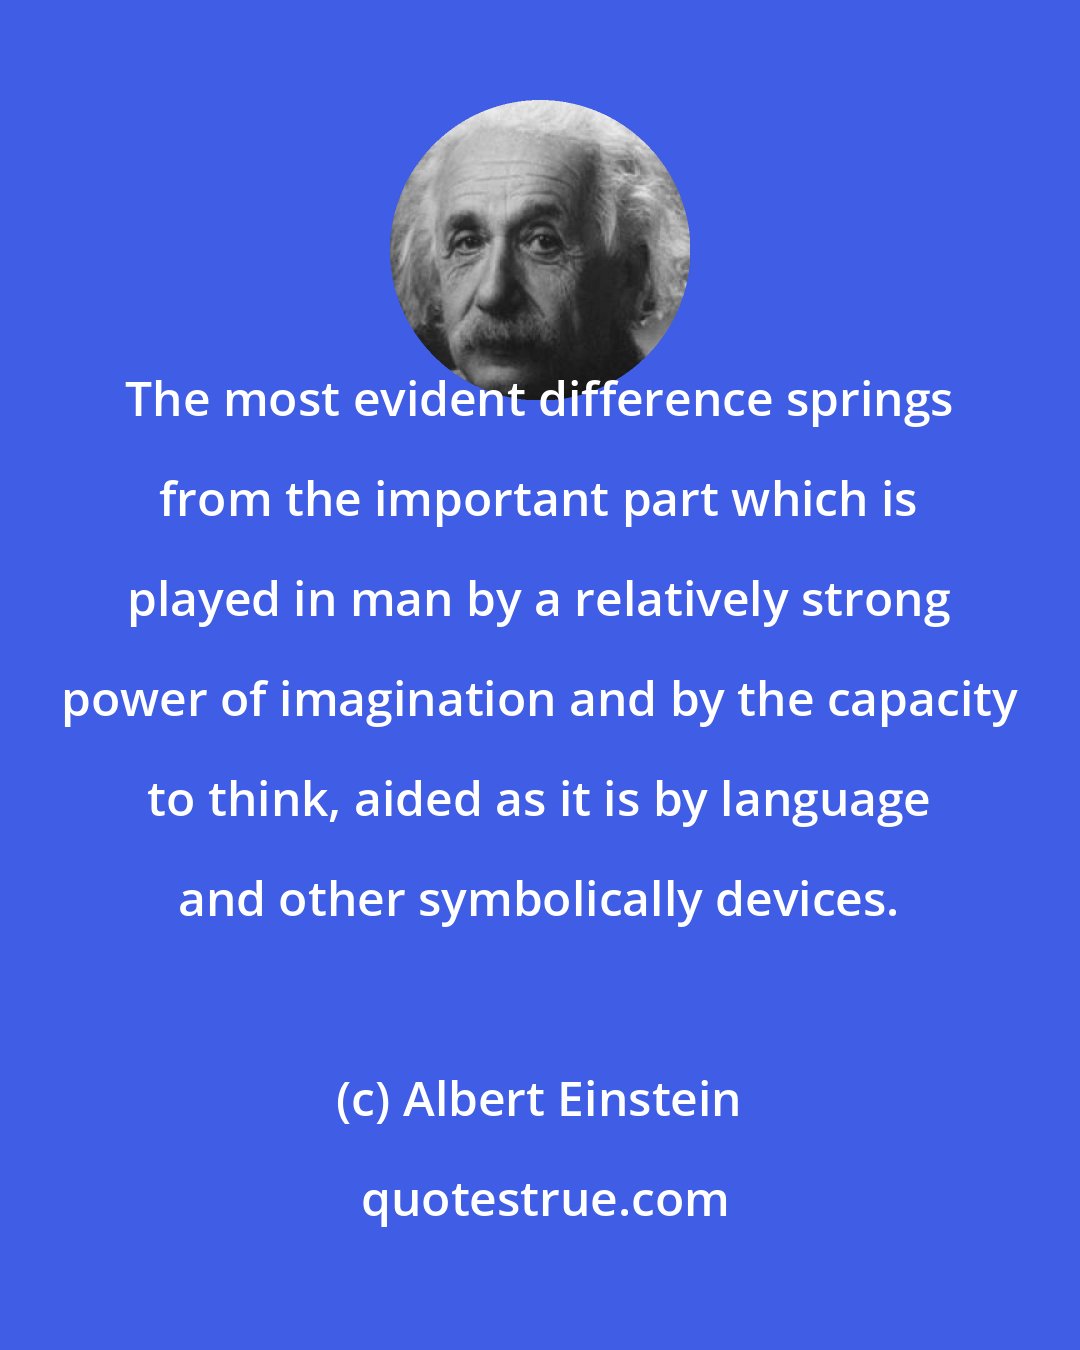 Albert Einstein: The most evident difference springs from the important part which is played in man by a relatively strong power of imagination and by the capacity to think, aided as it is by language and other symbolically devices.